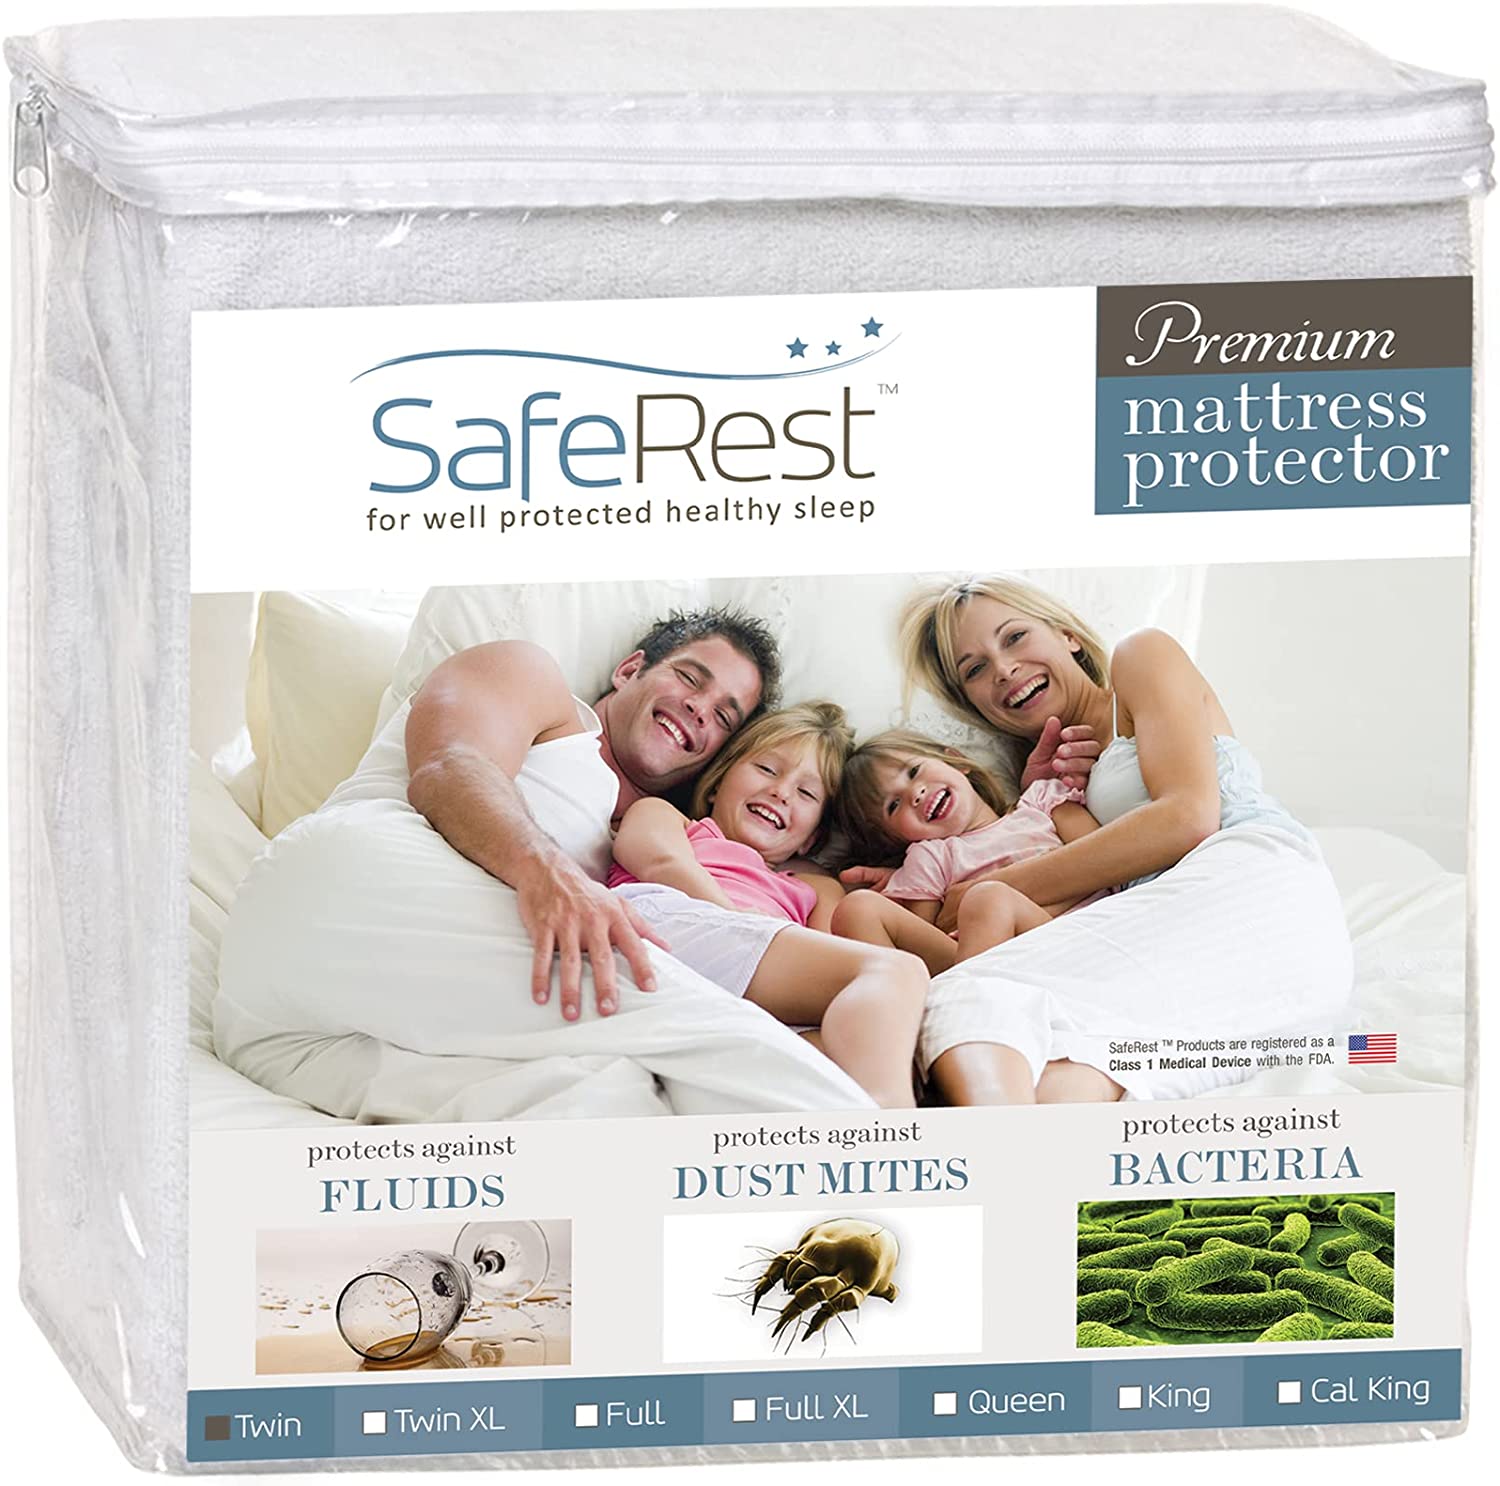 SafeRest Mattress Protector – Just $23.99 at Amazon